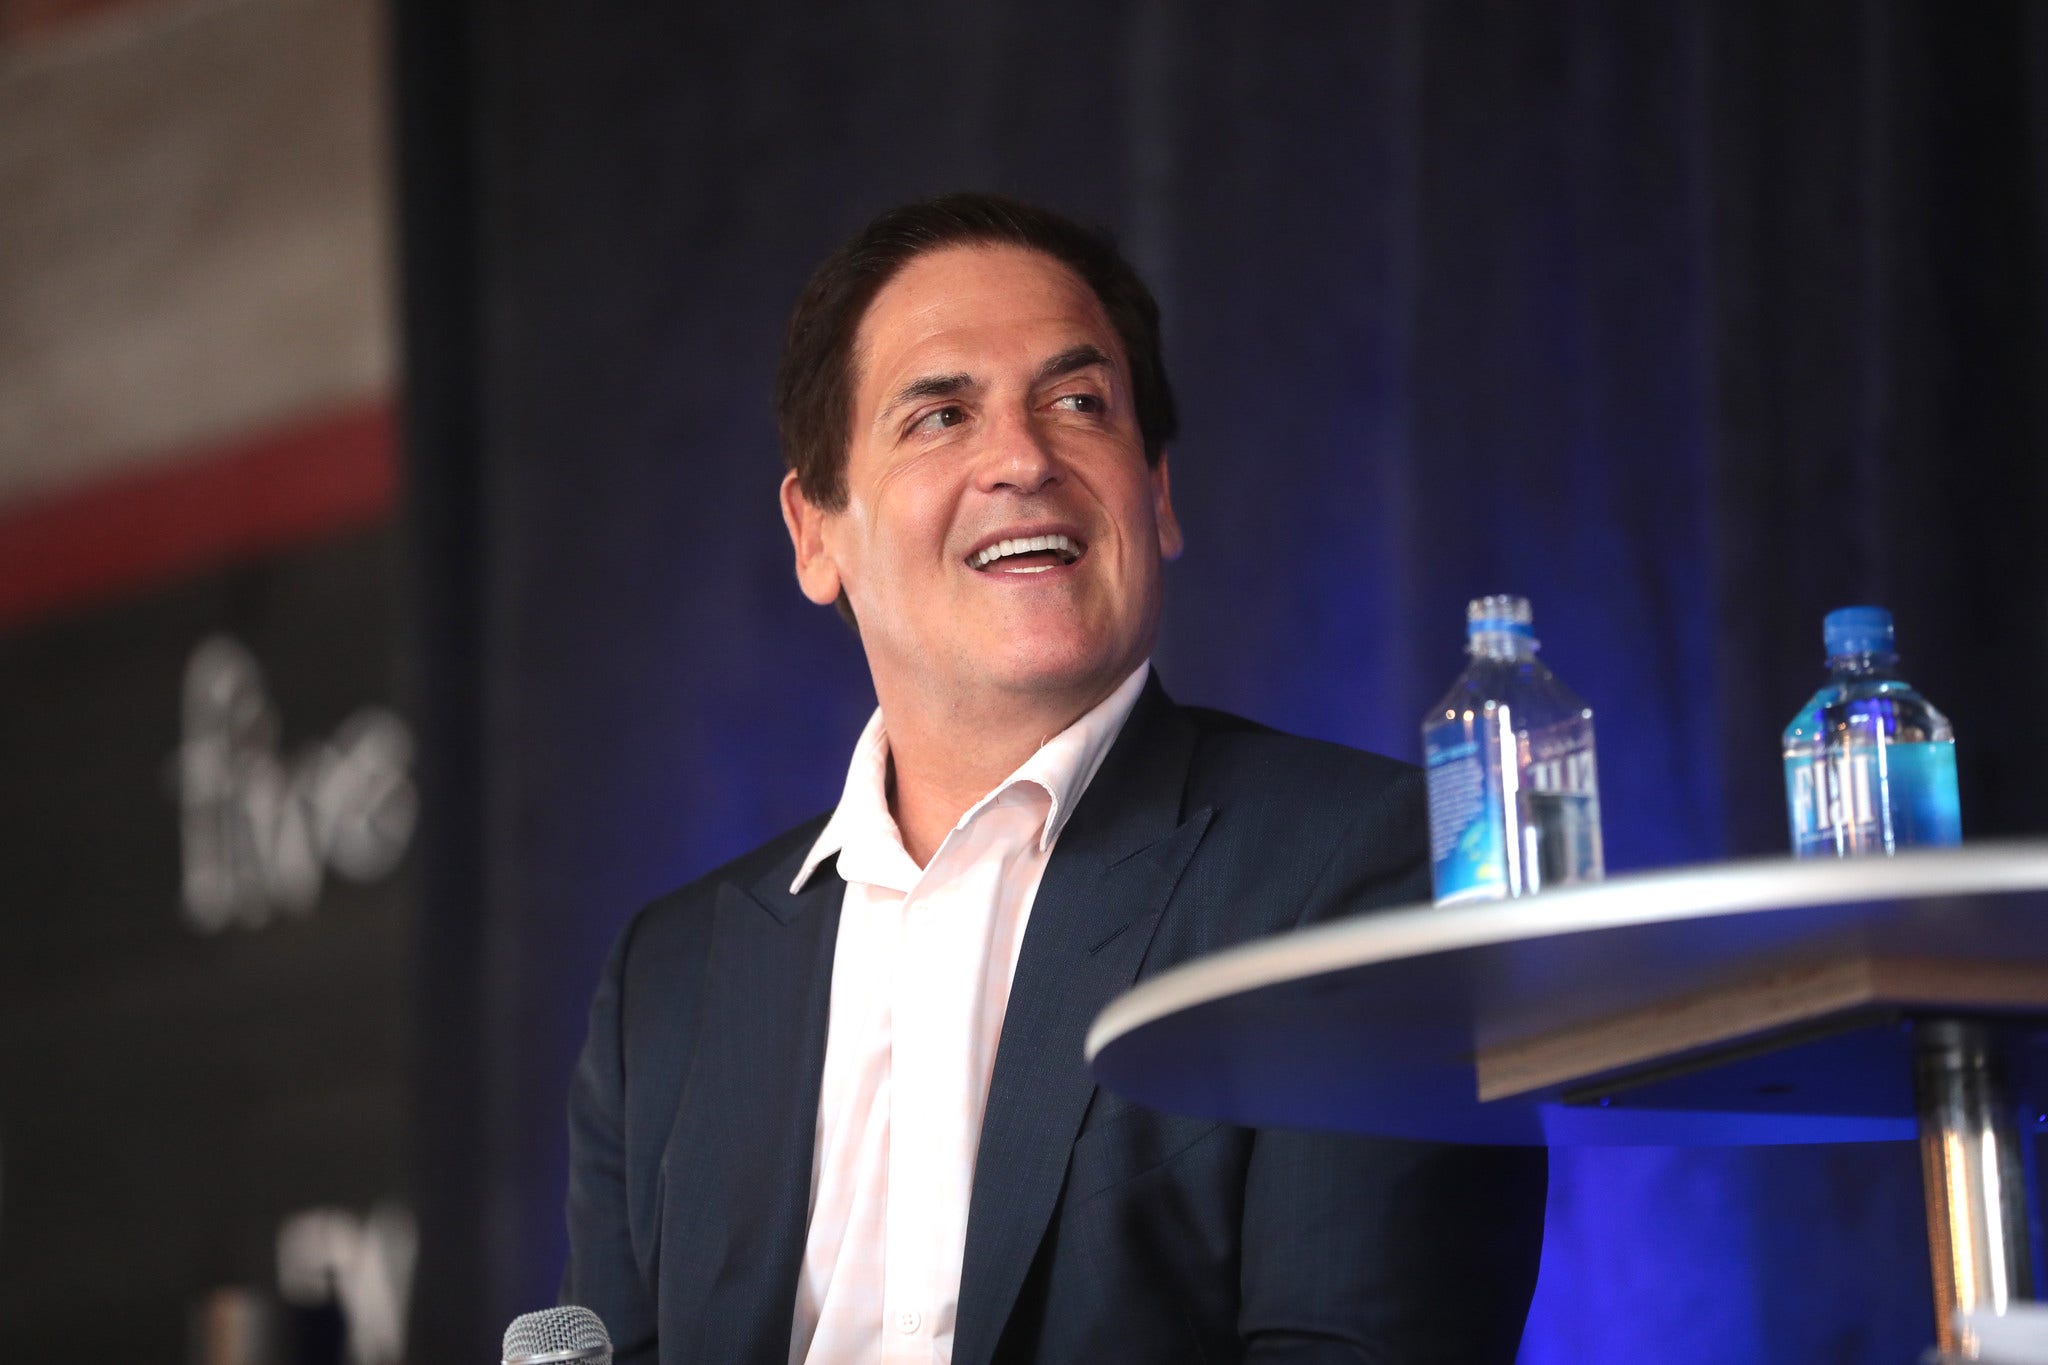 Sneak Peek Of Mark Cuban's Ethereum Wallet: 108 Cryptos Worth $467K, Which Ones Does He Own?